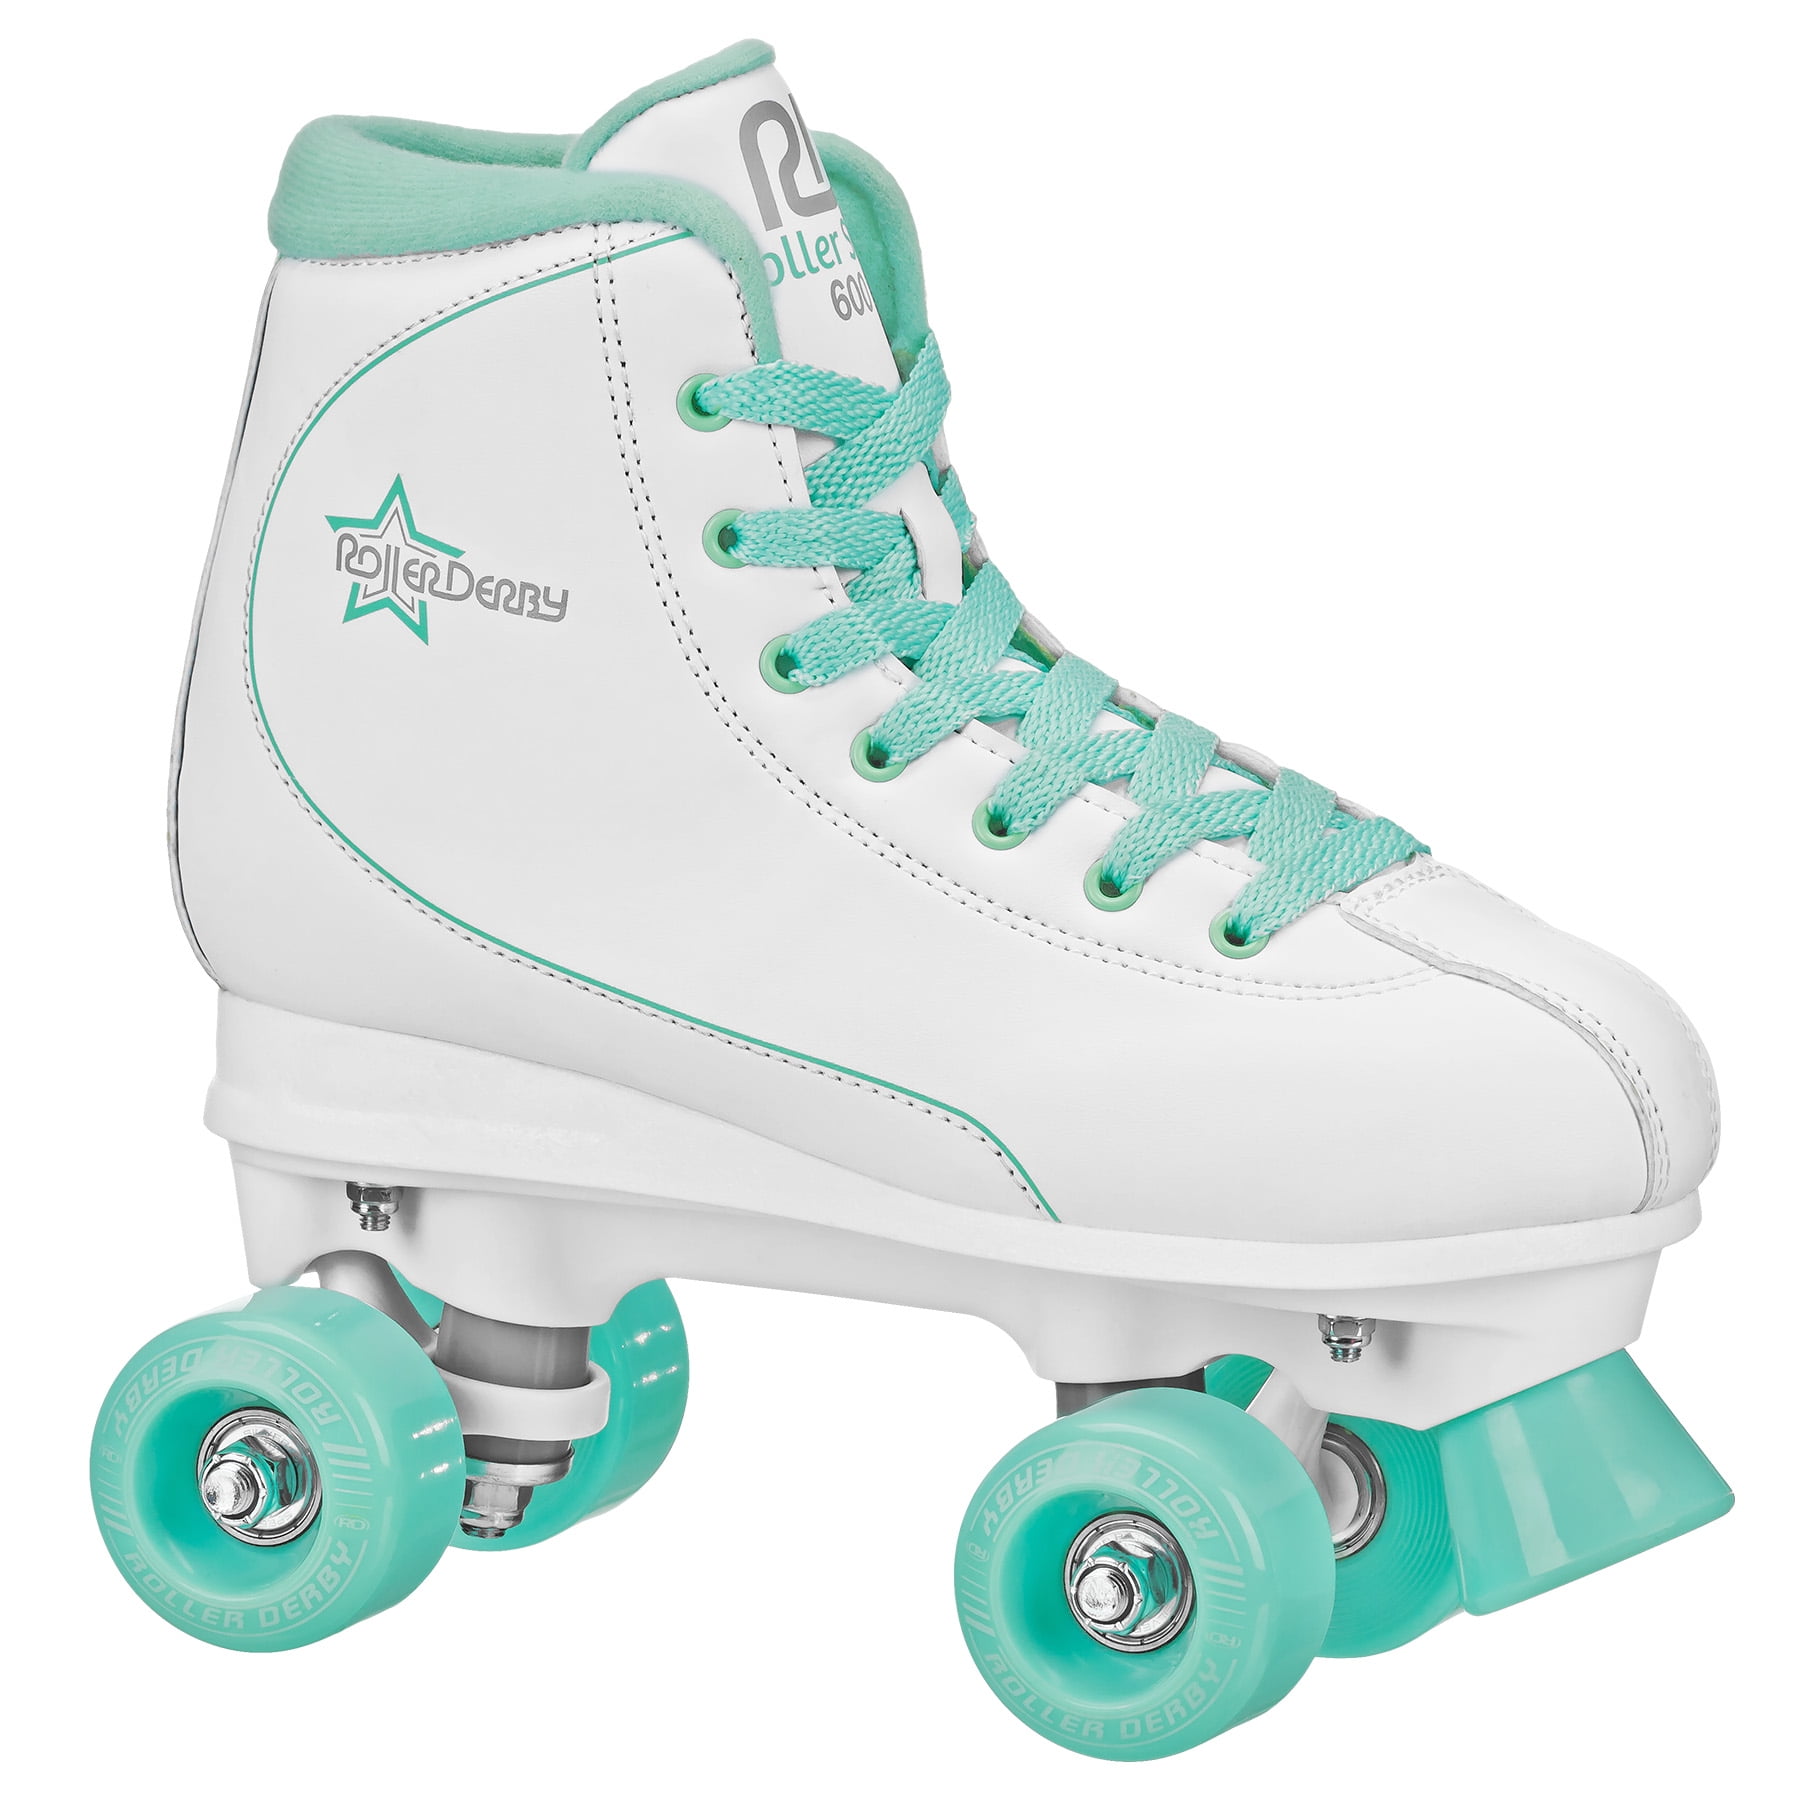 Roller Skates for Girls and Boys Kid Unisex Quad Roller Skates with High Top Shoe Style for Indoor/Outdoor 